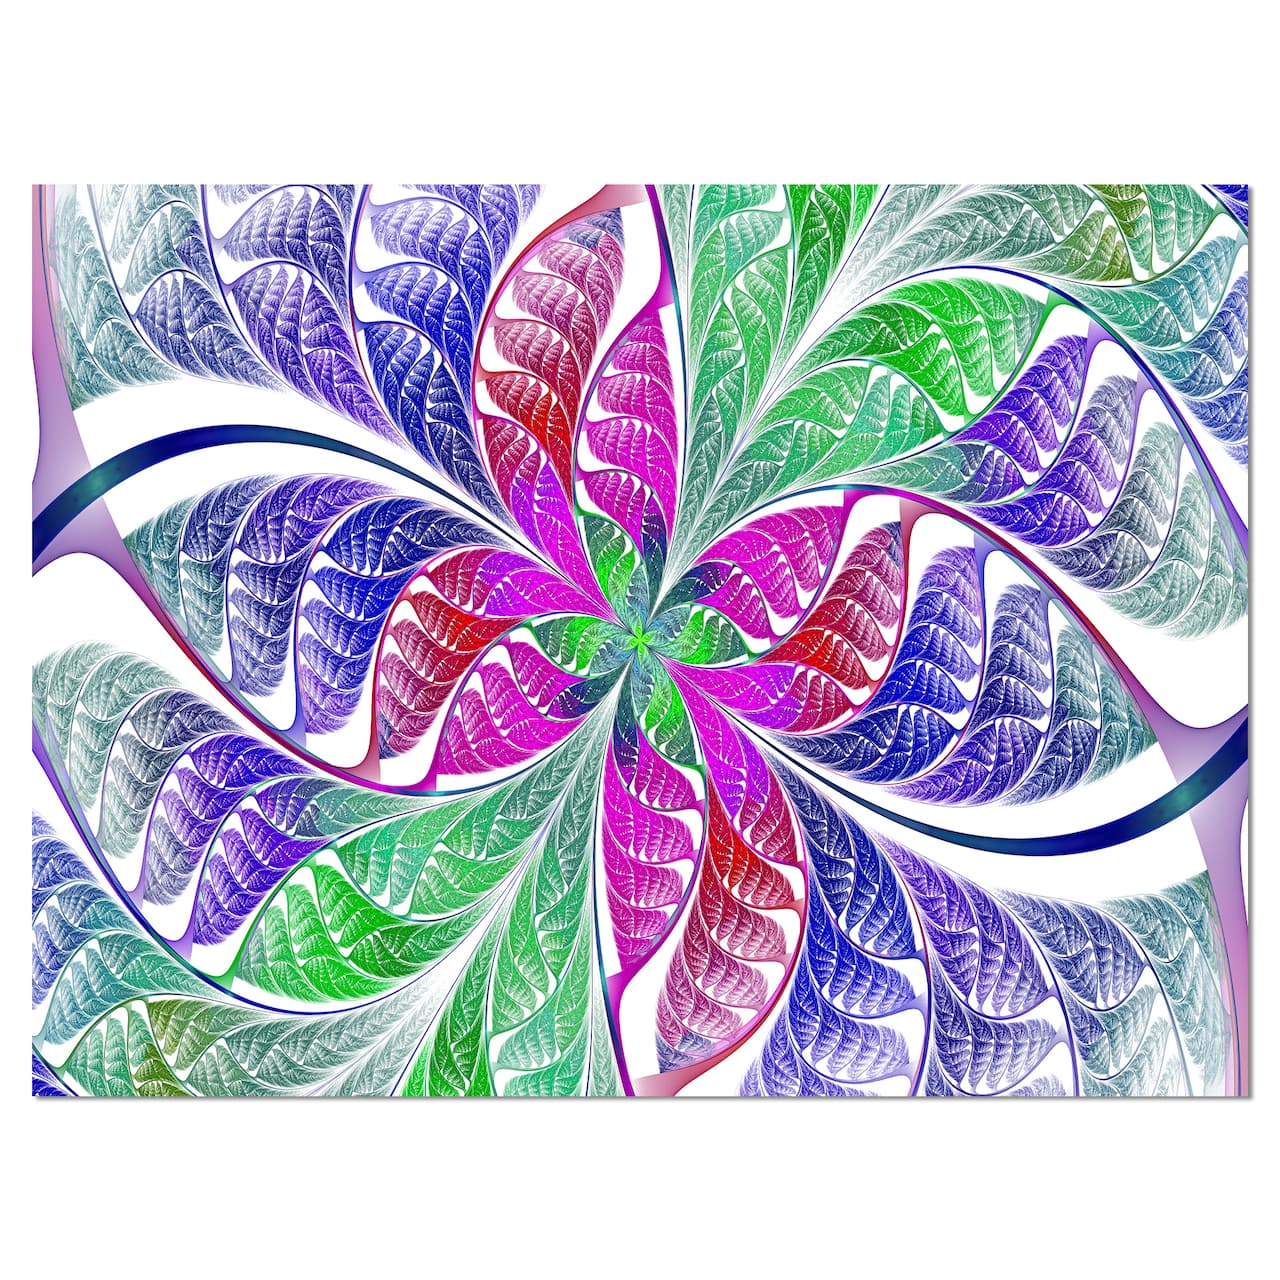 Designart - Flower like Fractal Stained Glass - Abstract Wall Art Canvas